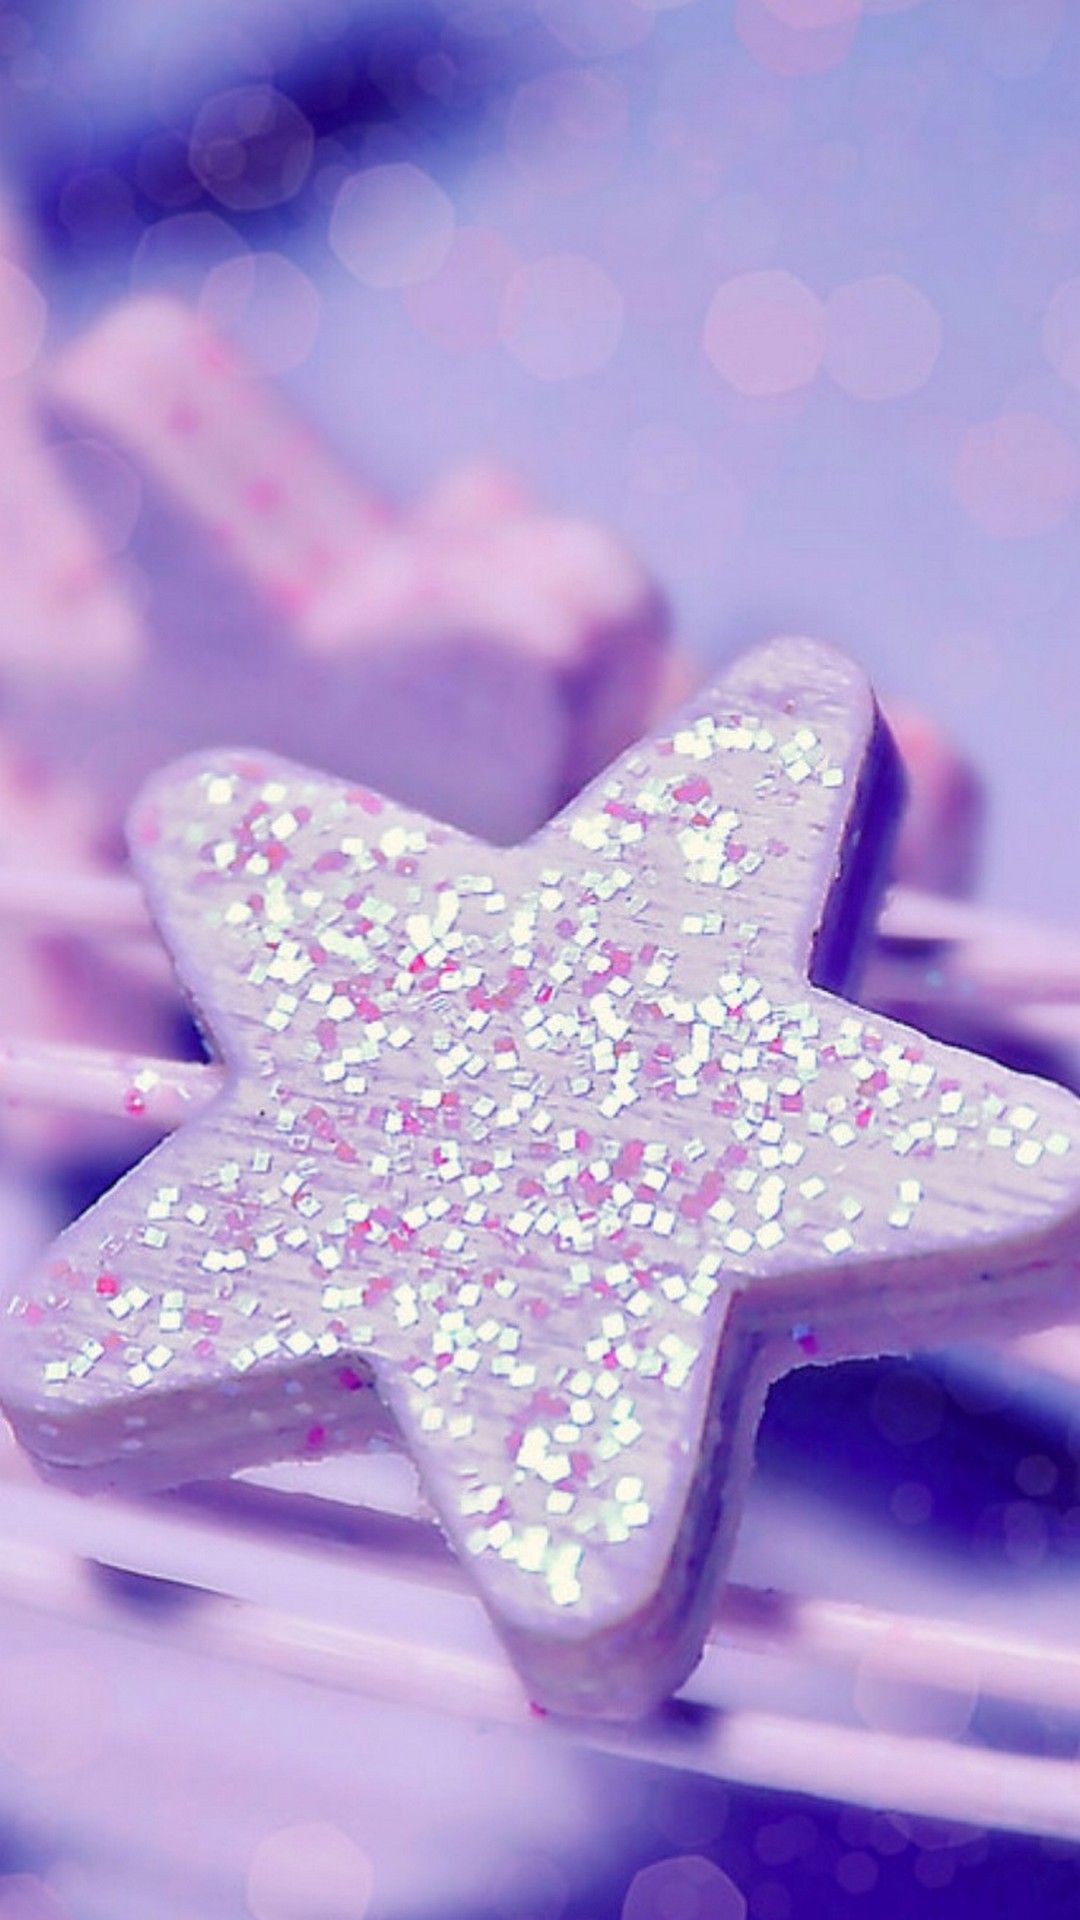 Cute Star Girly Wallpaper Android Cute Wallpaper